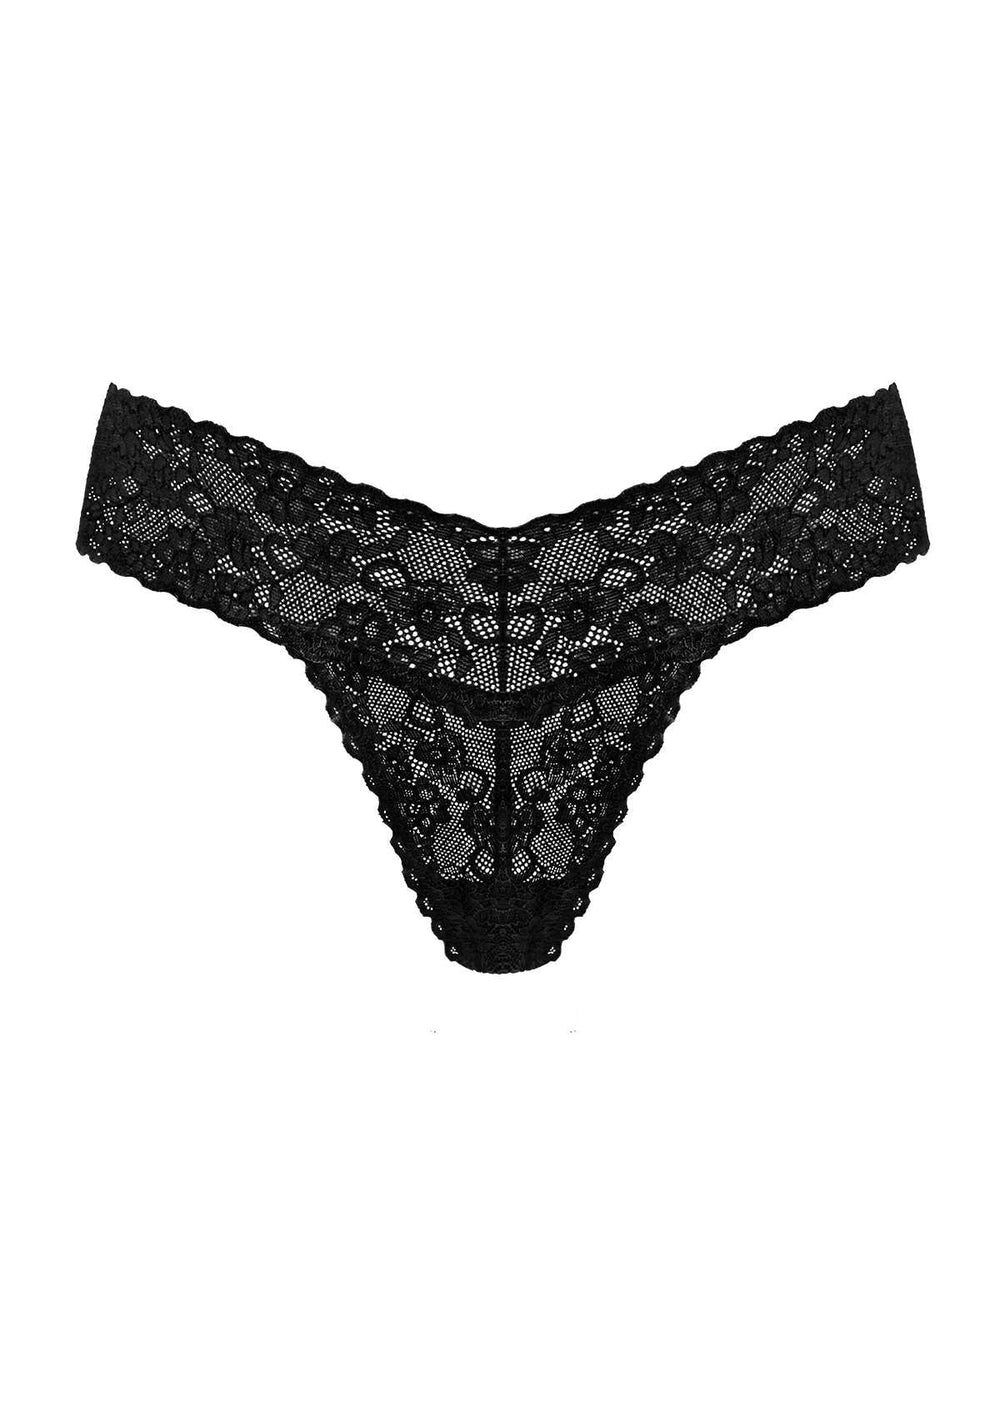 Take Talk Cheeky Underwear for Women Sexy Lace Panties Soft